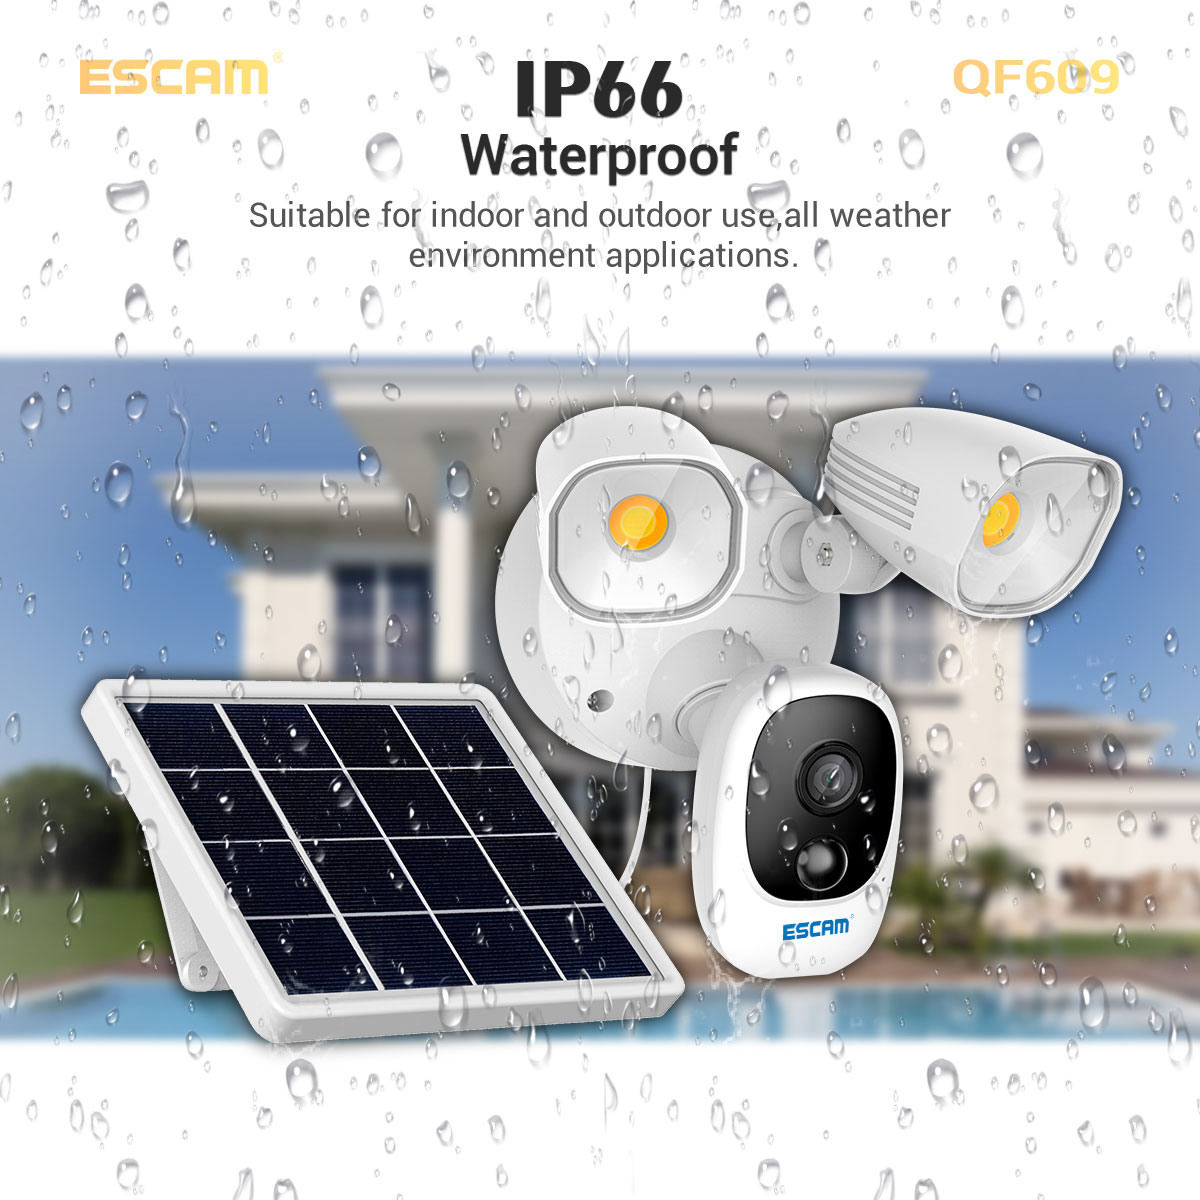 ESCAM QF609 Solar Powered Floodlight 1080P Wireless Battery 1000LM Floodlight Cloud Storage Camera With 12000mAh Rechargeable Batteries Color Night Vision IP66 Waterproof 2-Way Audio Cloud Storage